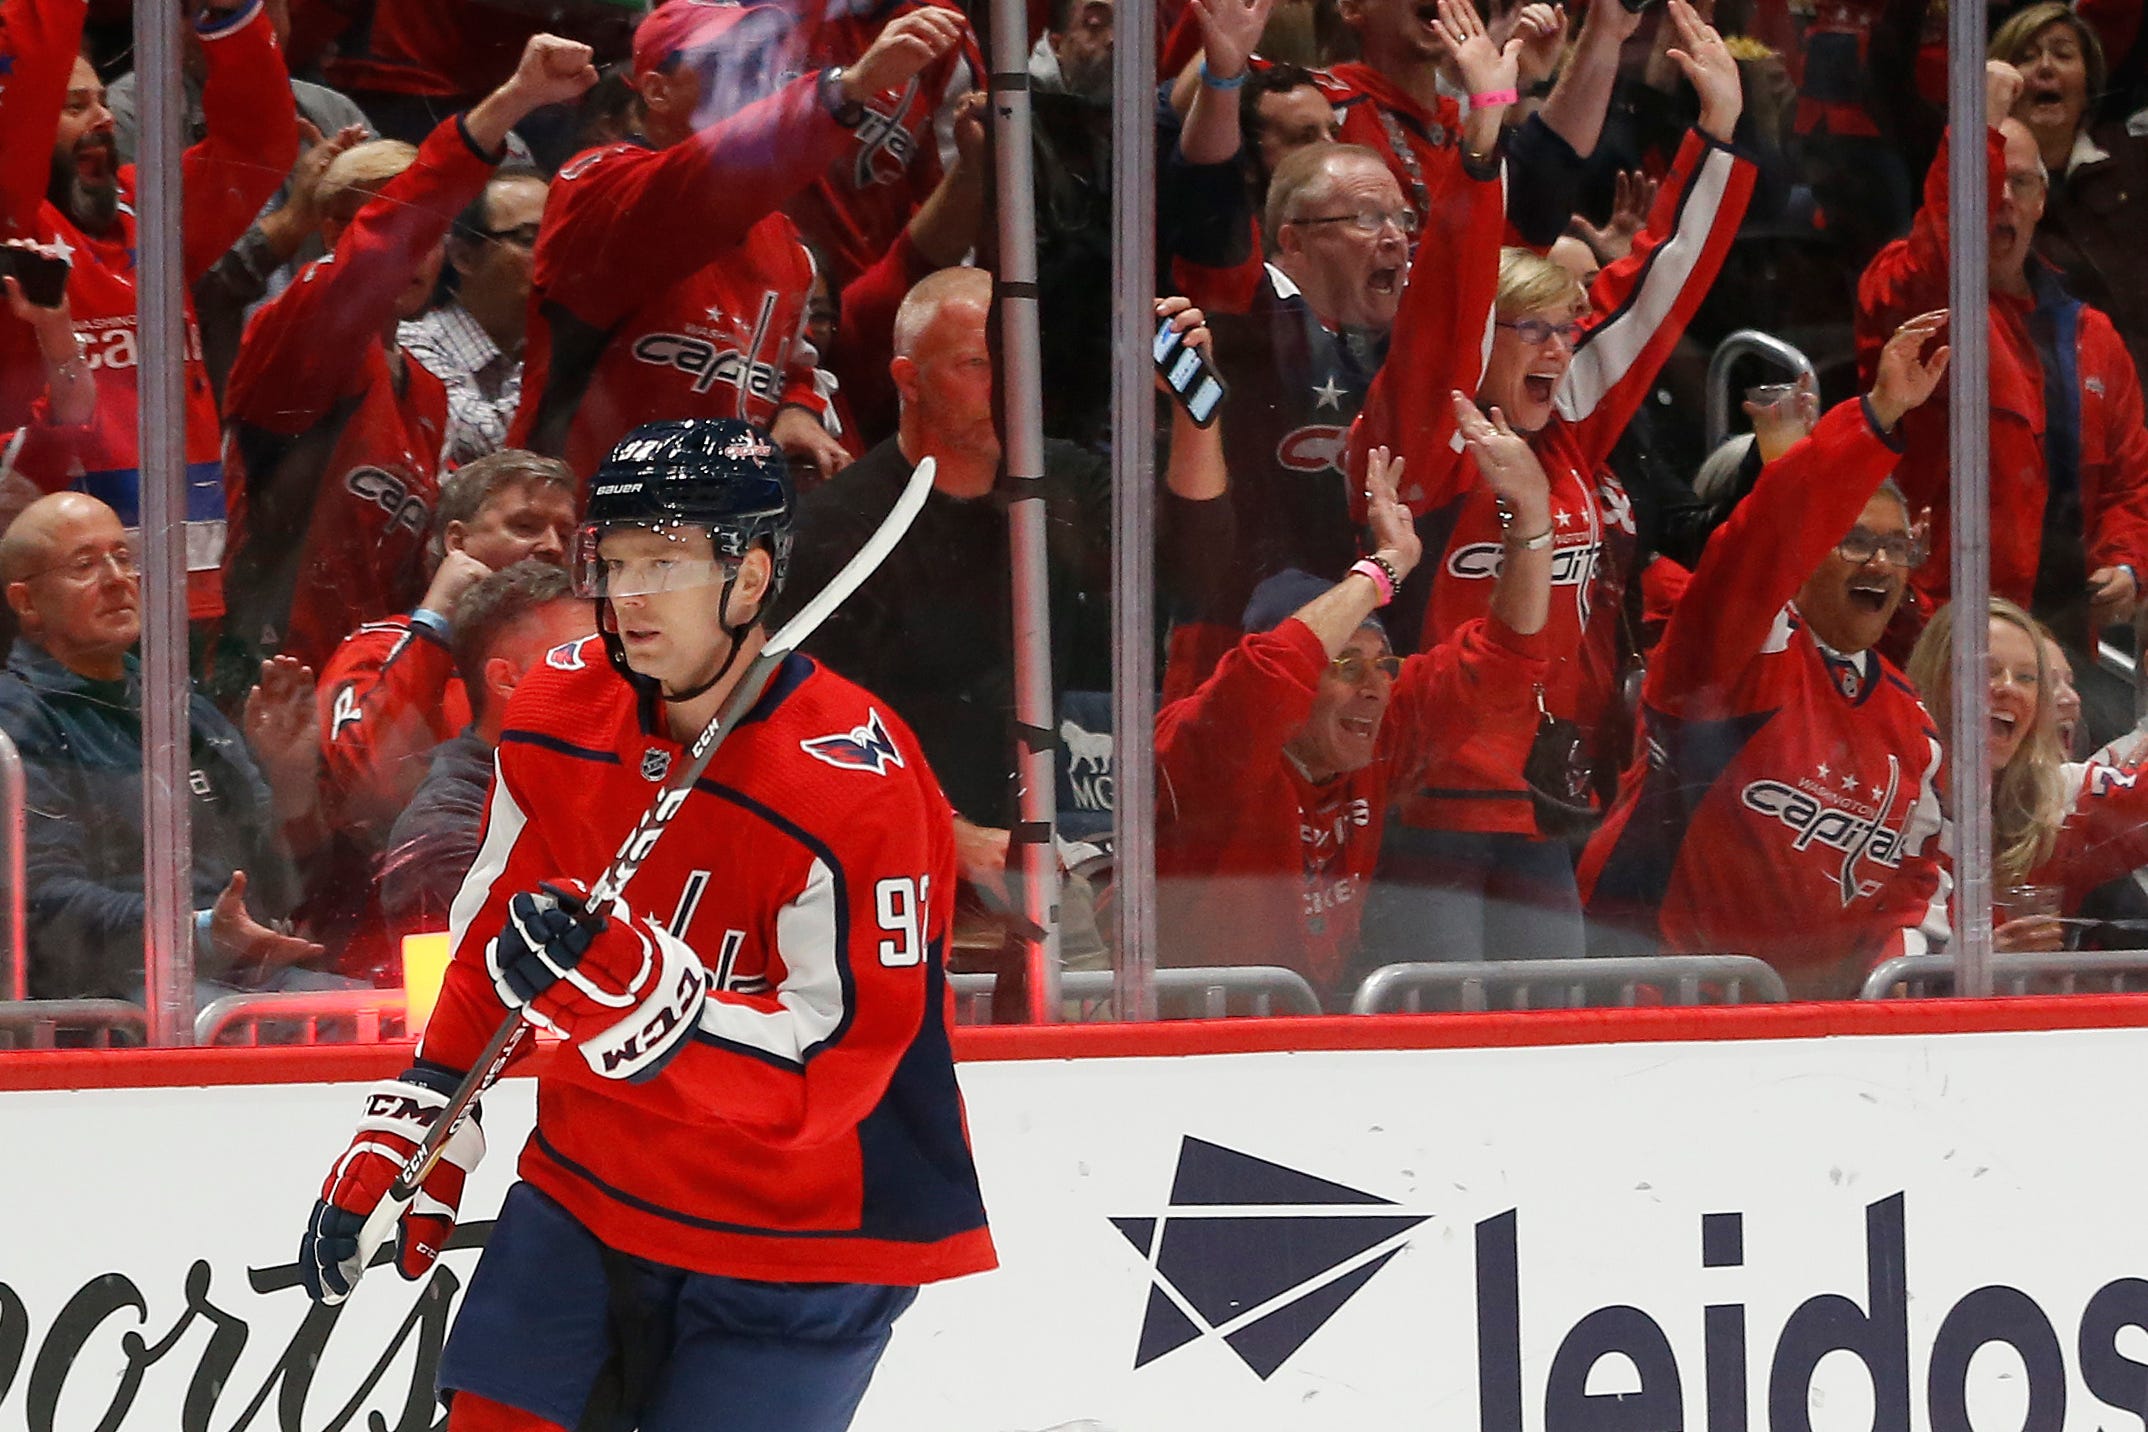 Capitals star Evgeny Kuznetsov scores in his first game back from drug-related suspension